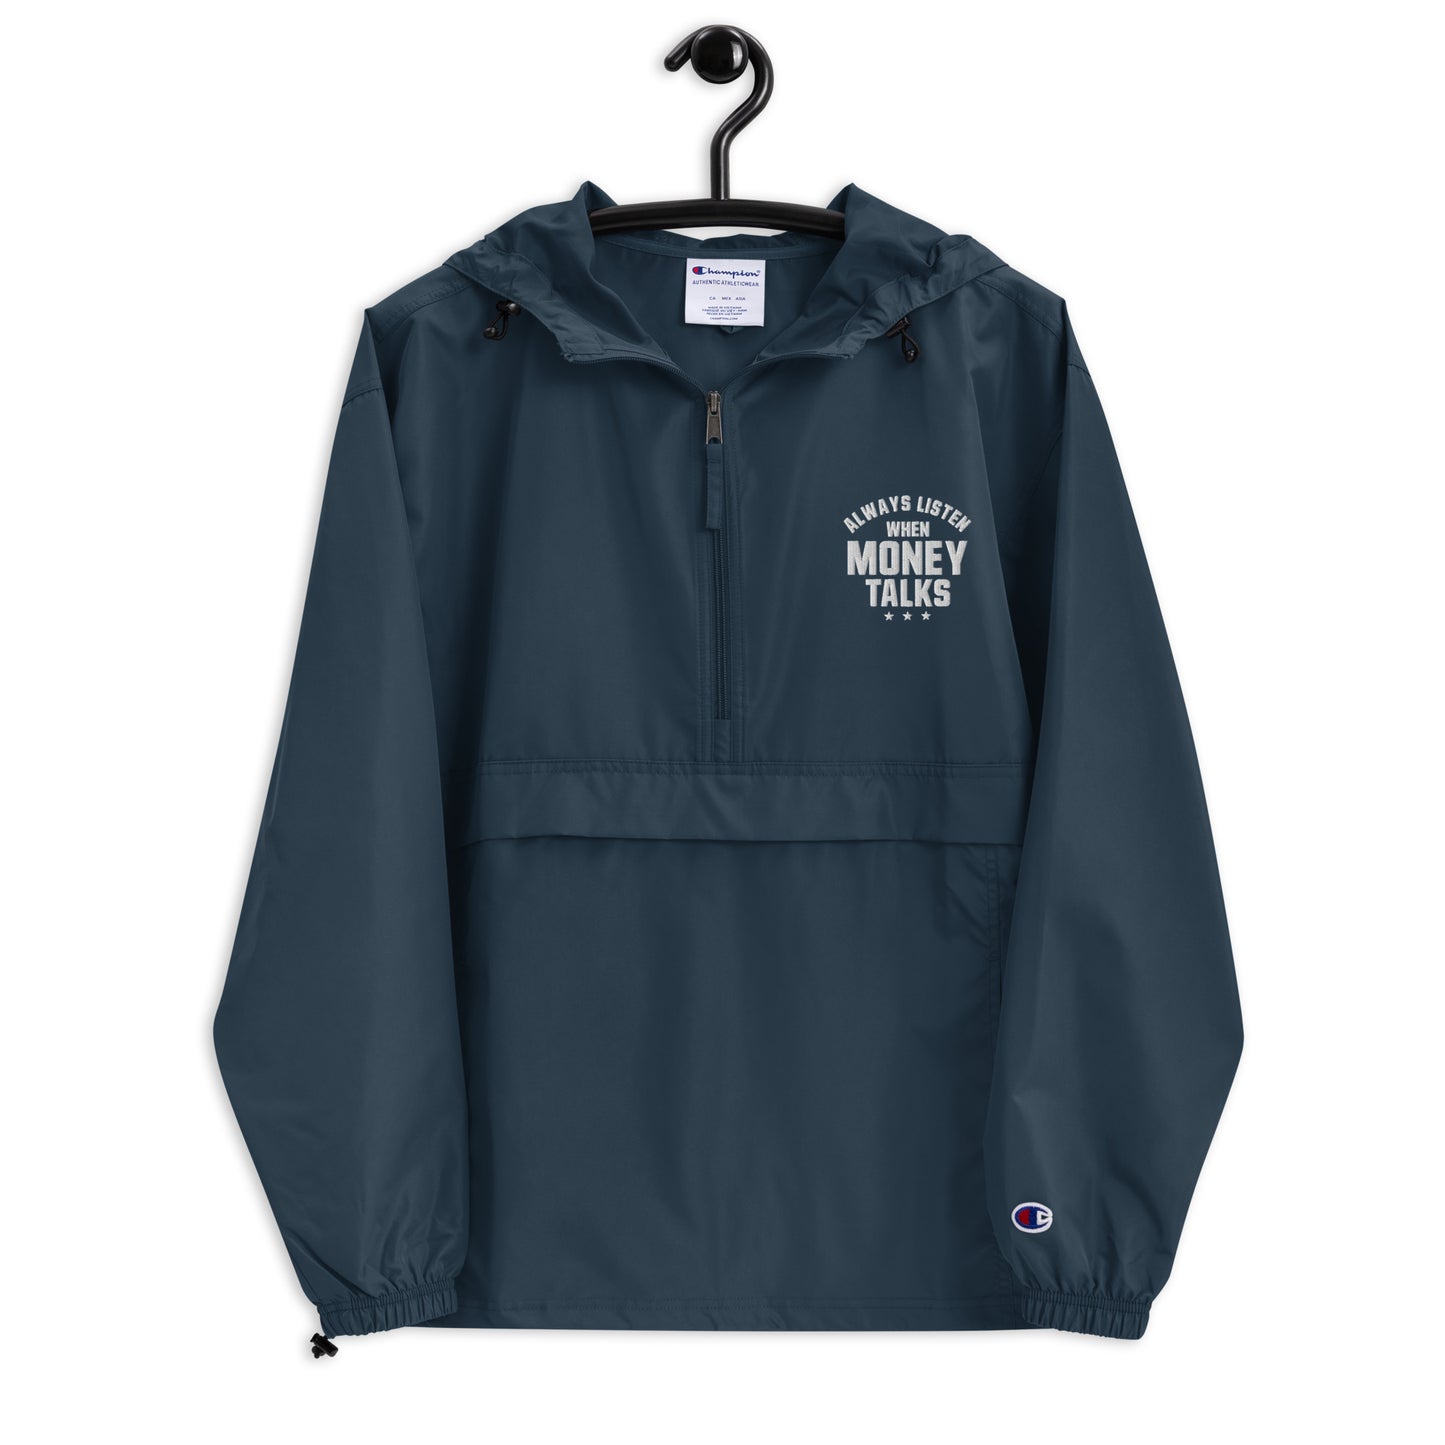 Always listen Embroidered Champion Packable Jacket